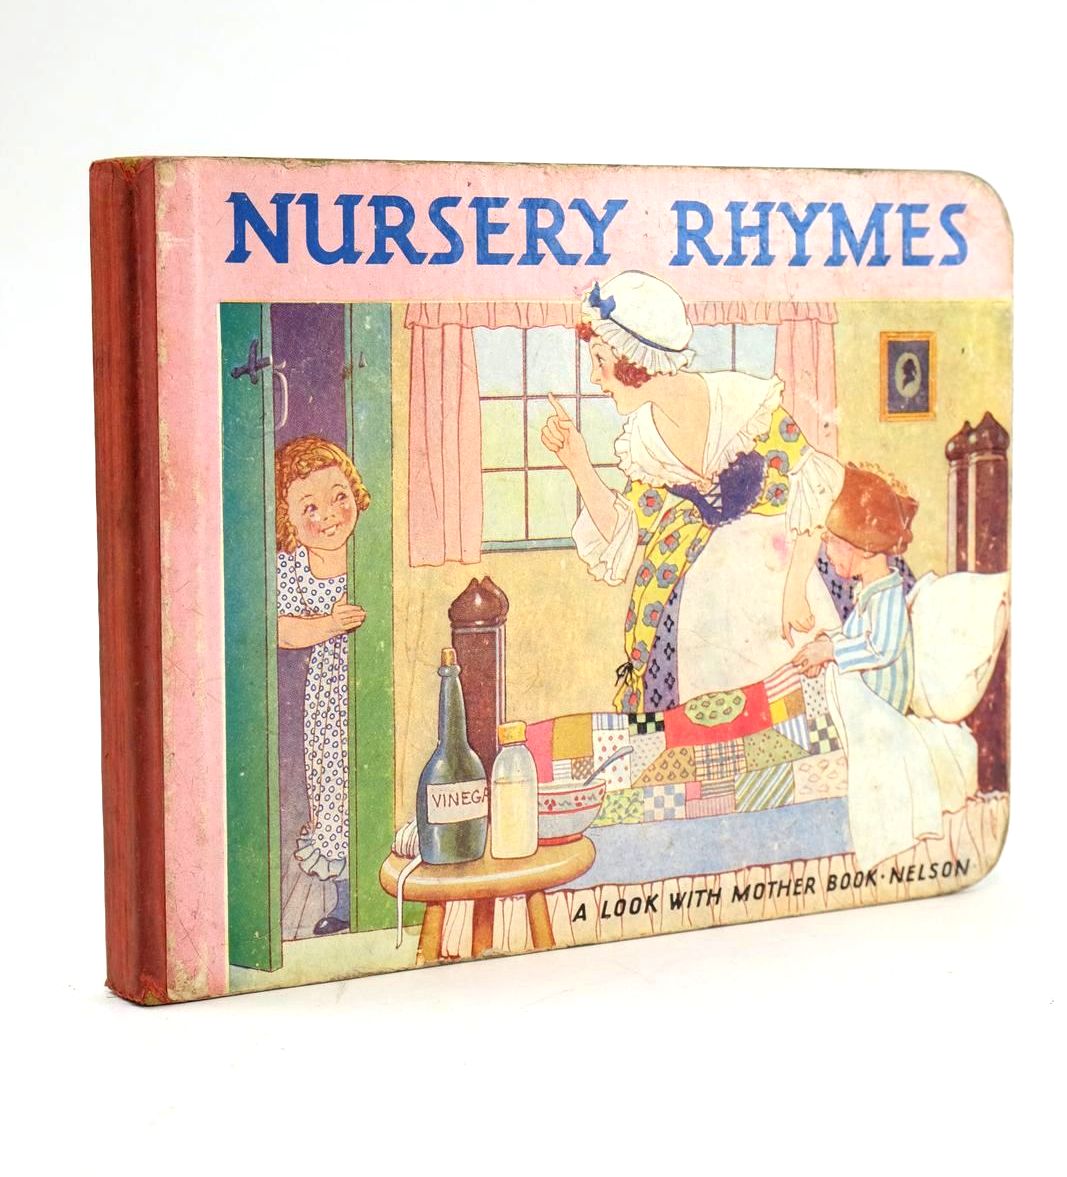 Photo of NURSERY RHYMES illustrated by Wood, Lawson published by Thomas Nelson and Sons Ltd. (STOCK CODE: 1325027)  for sale by Stella & Rose's Books